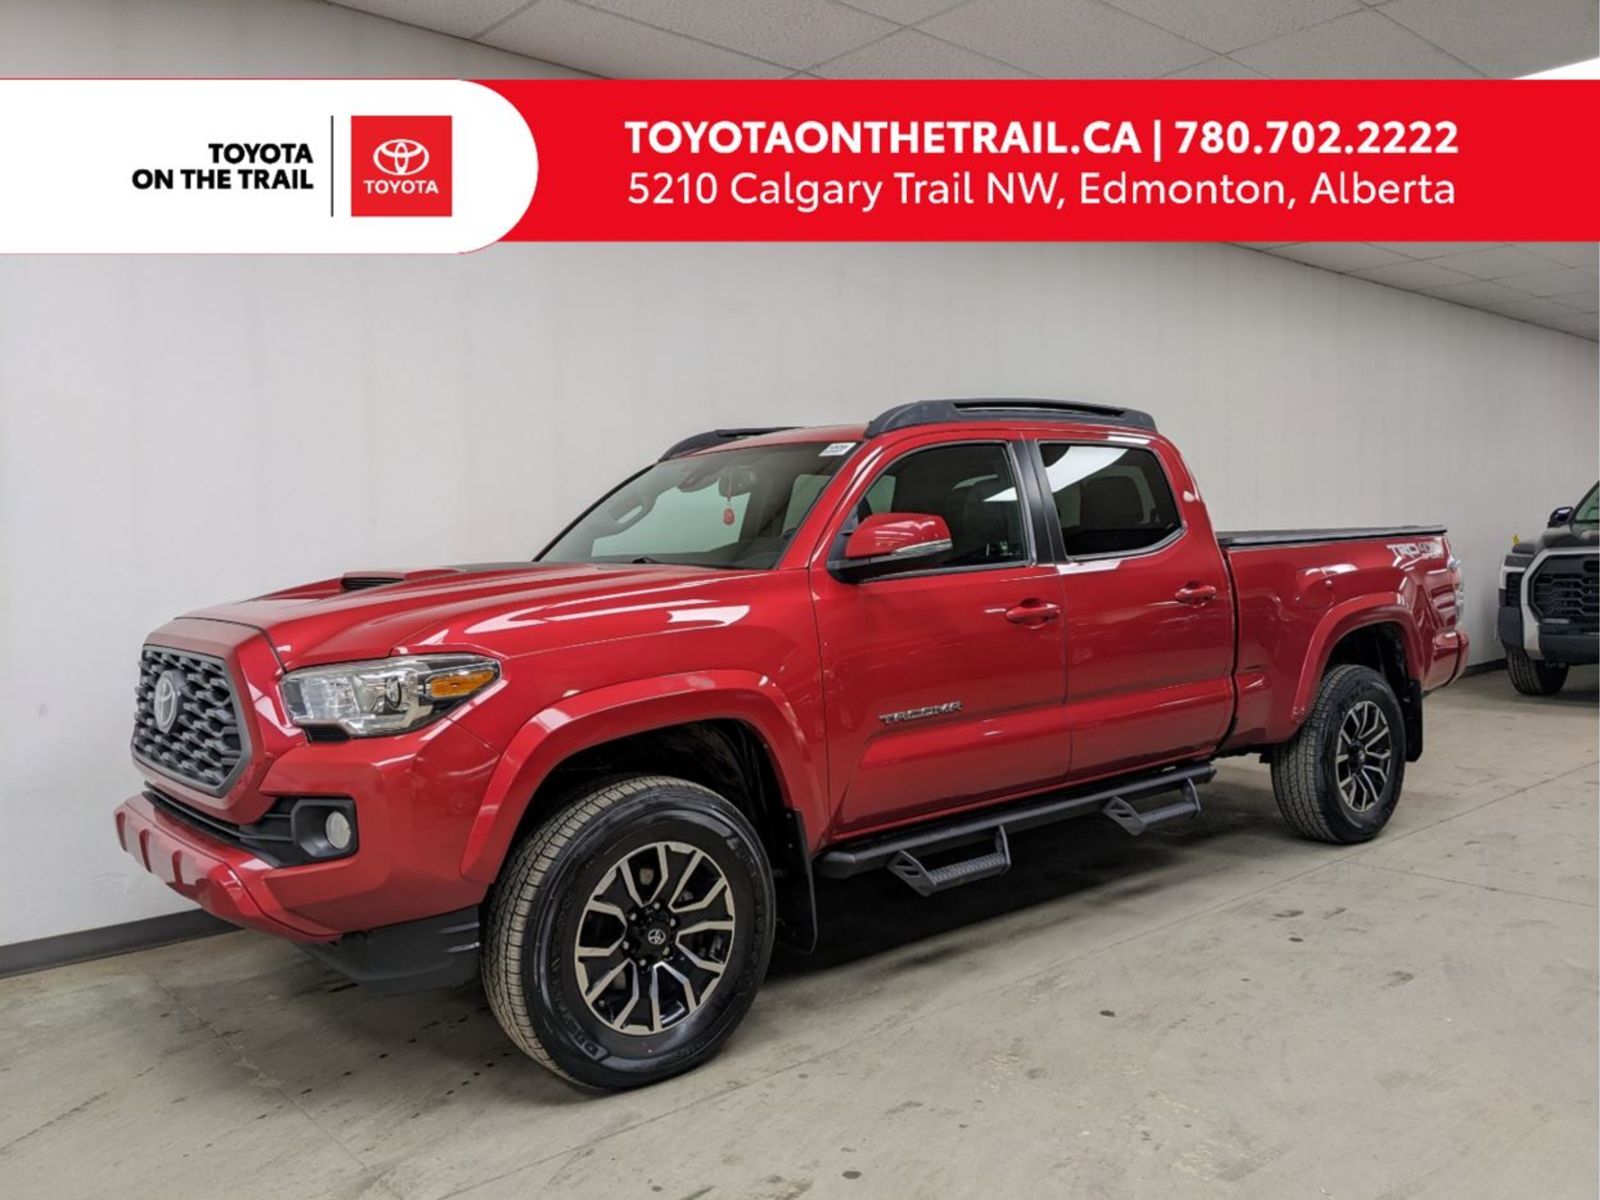 2021 Toyota Tacoma TRD SPORT PREMIUM; LEATHER, SUNROOF, QI CHARGER, S